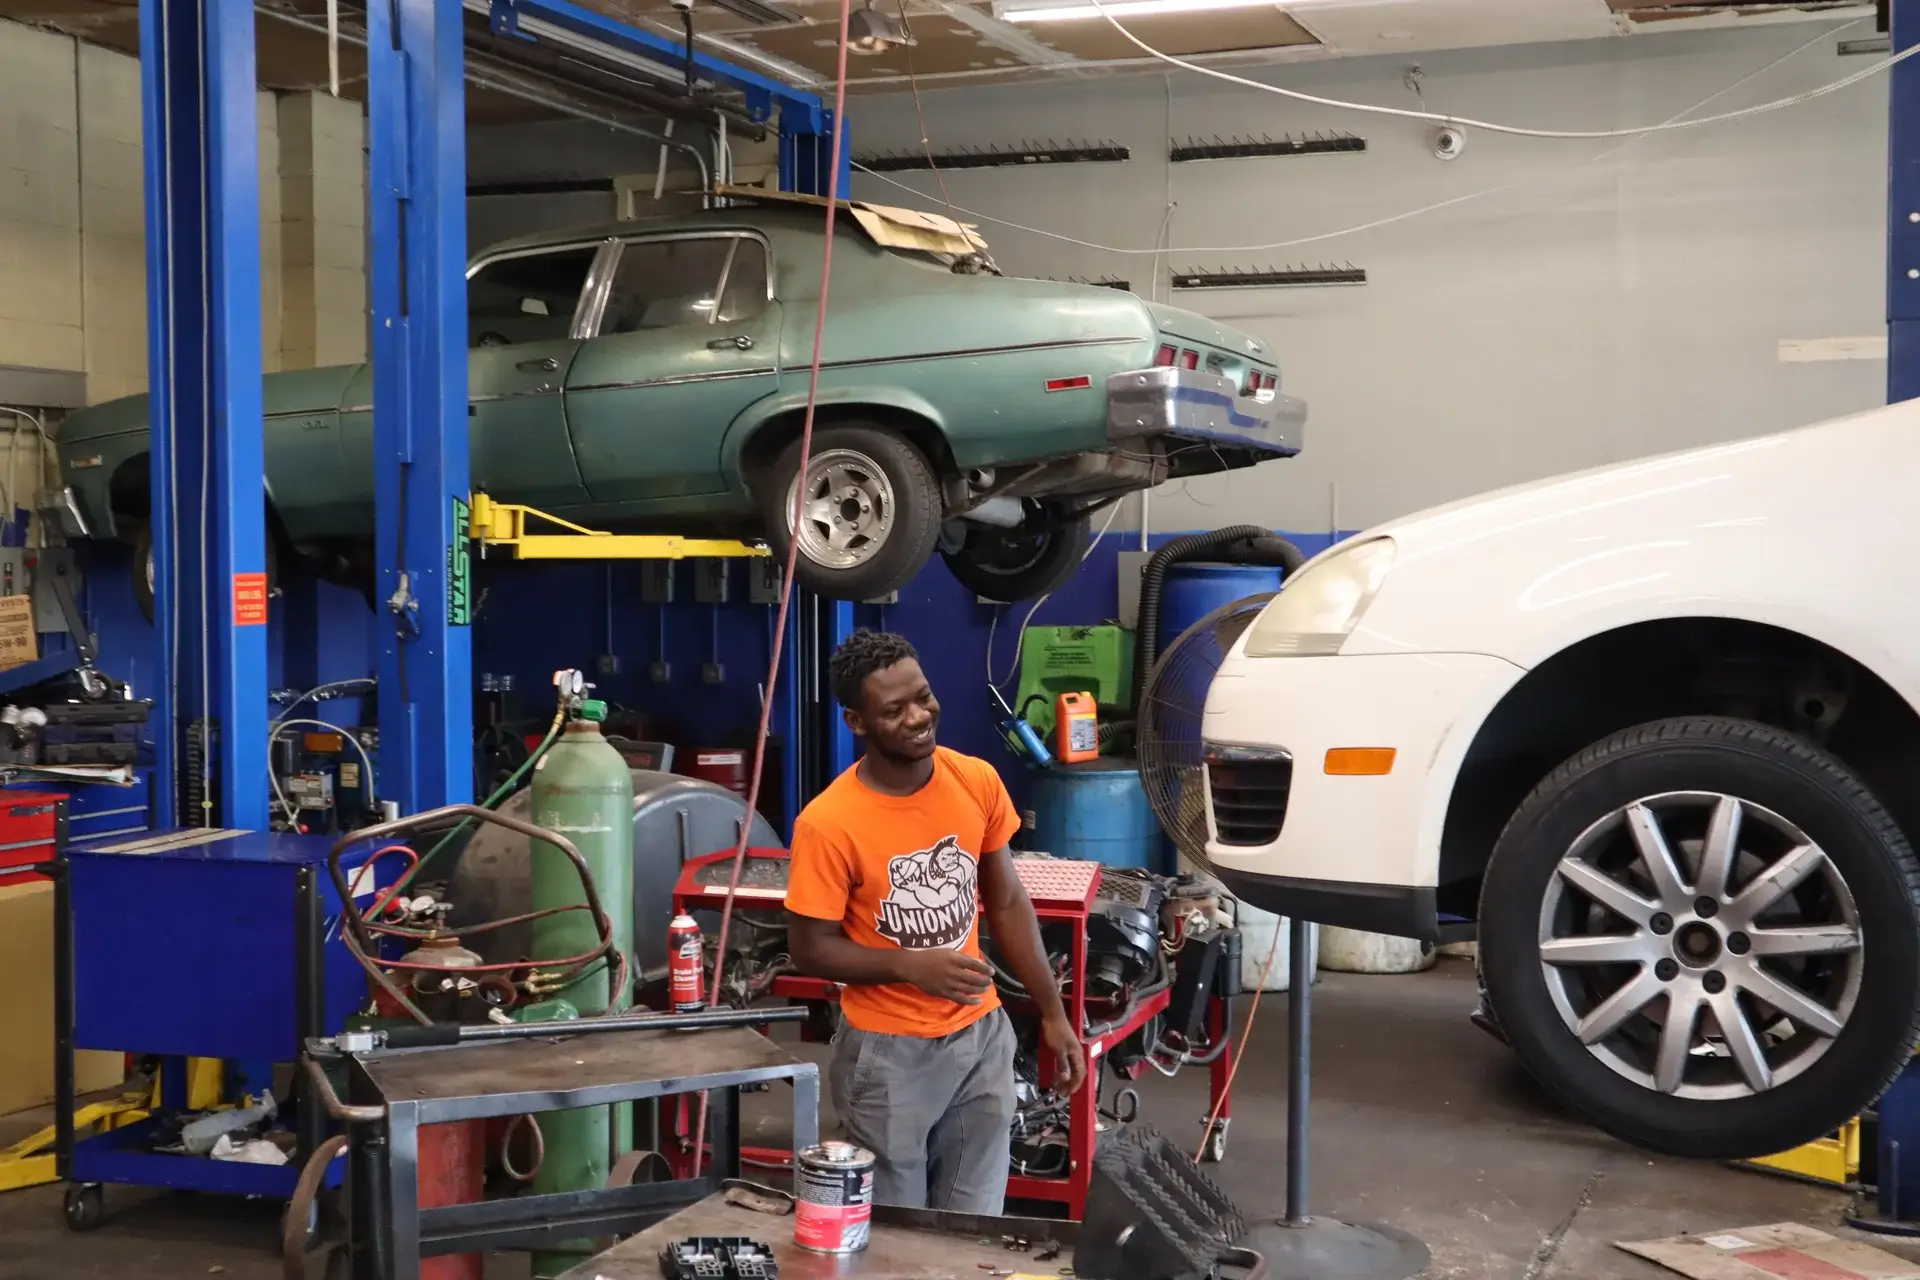 Strategies For Auto Mechanics To Maximize Earnings And Achieve 6 Figures